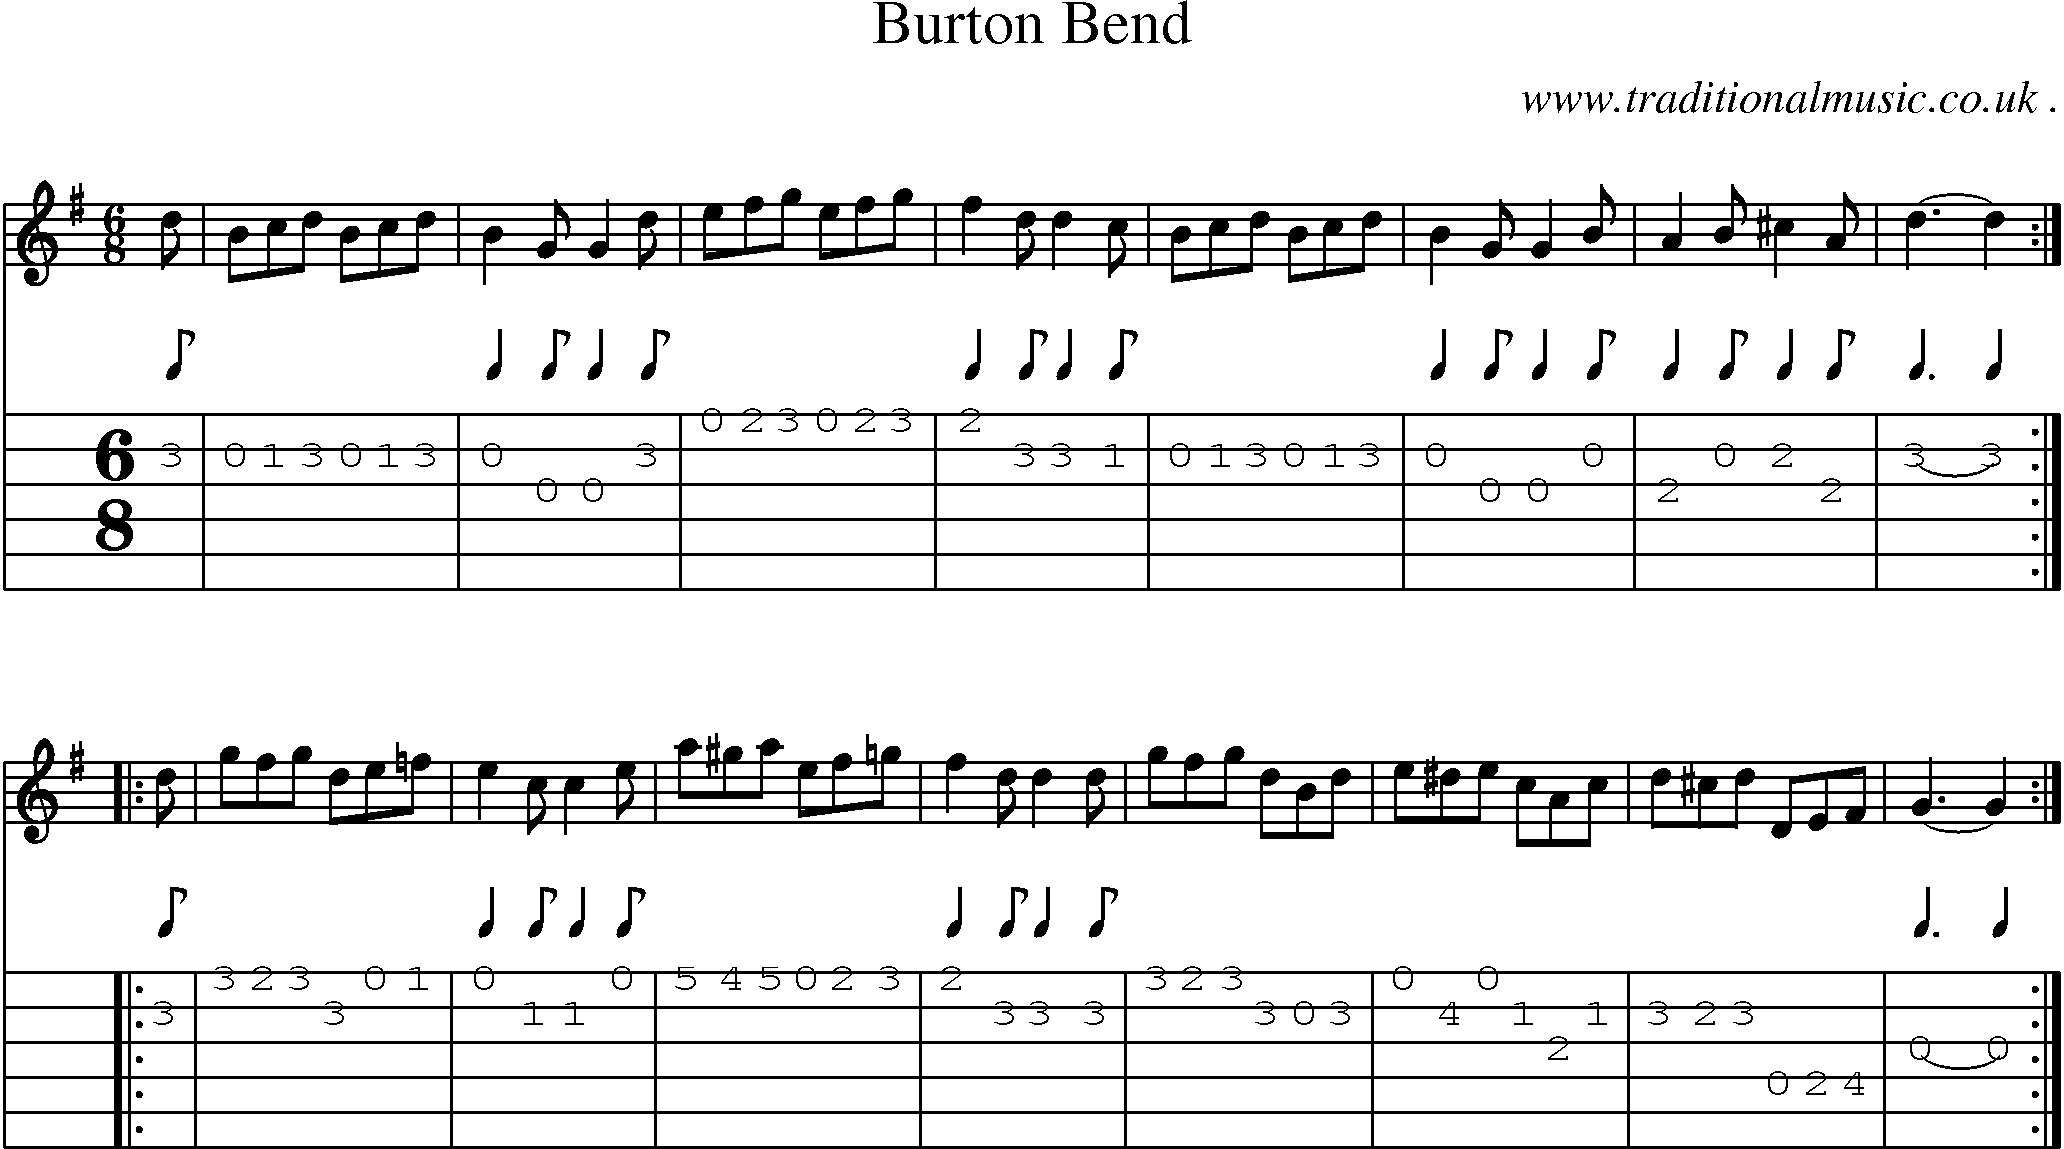 Sheet-music  score, Chords and Guitar Tabs for Burton Bend